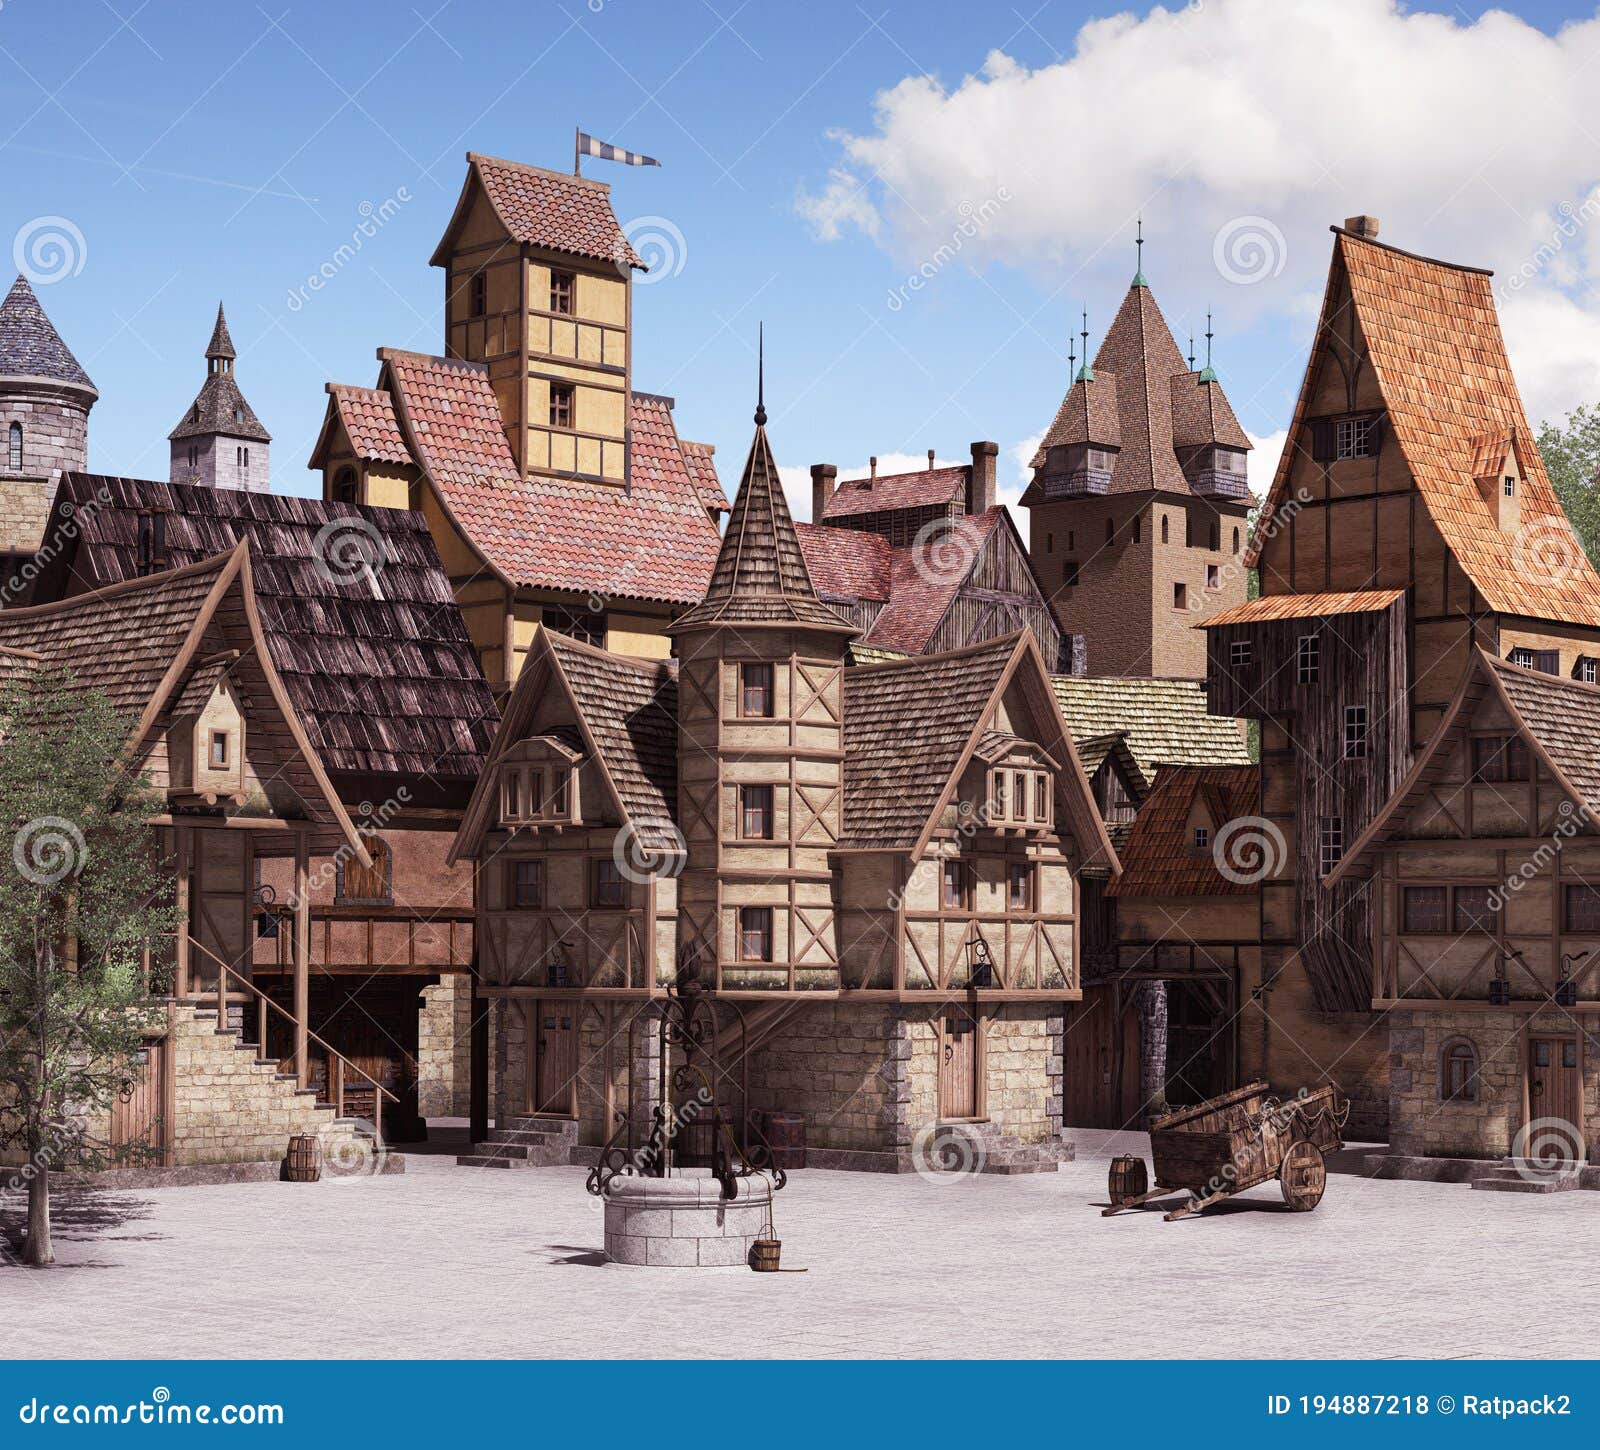 european medieval or fantasy town square on a sunny day